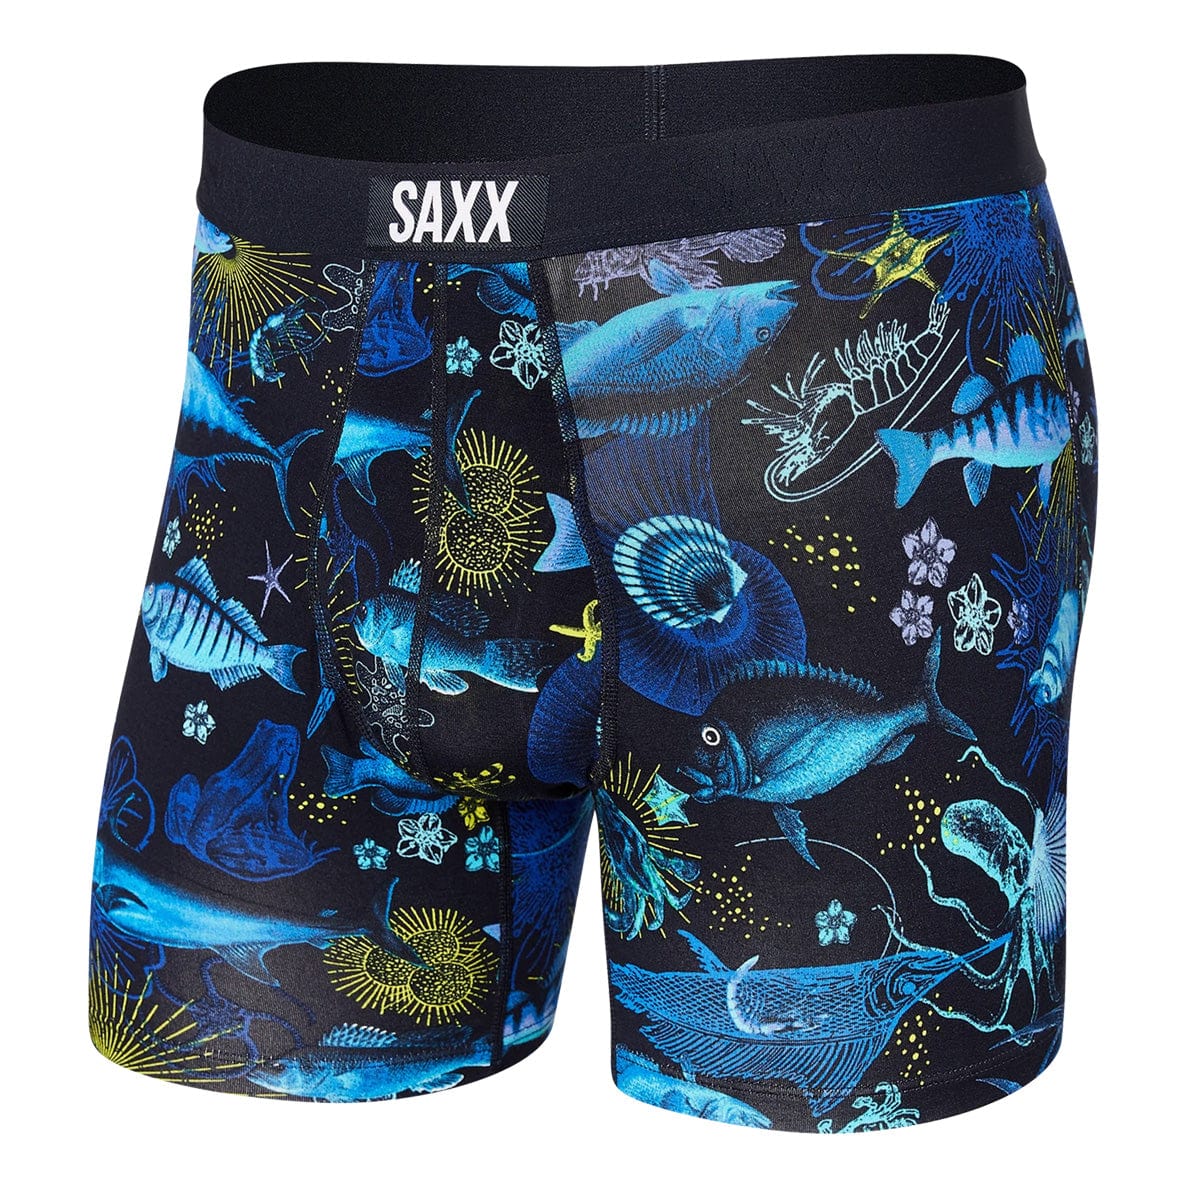 Saxx Ultra Boxers - Undersea Garden - The Hockey Shop Source For Sports